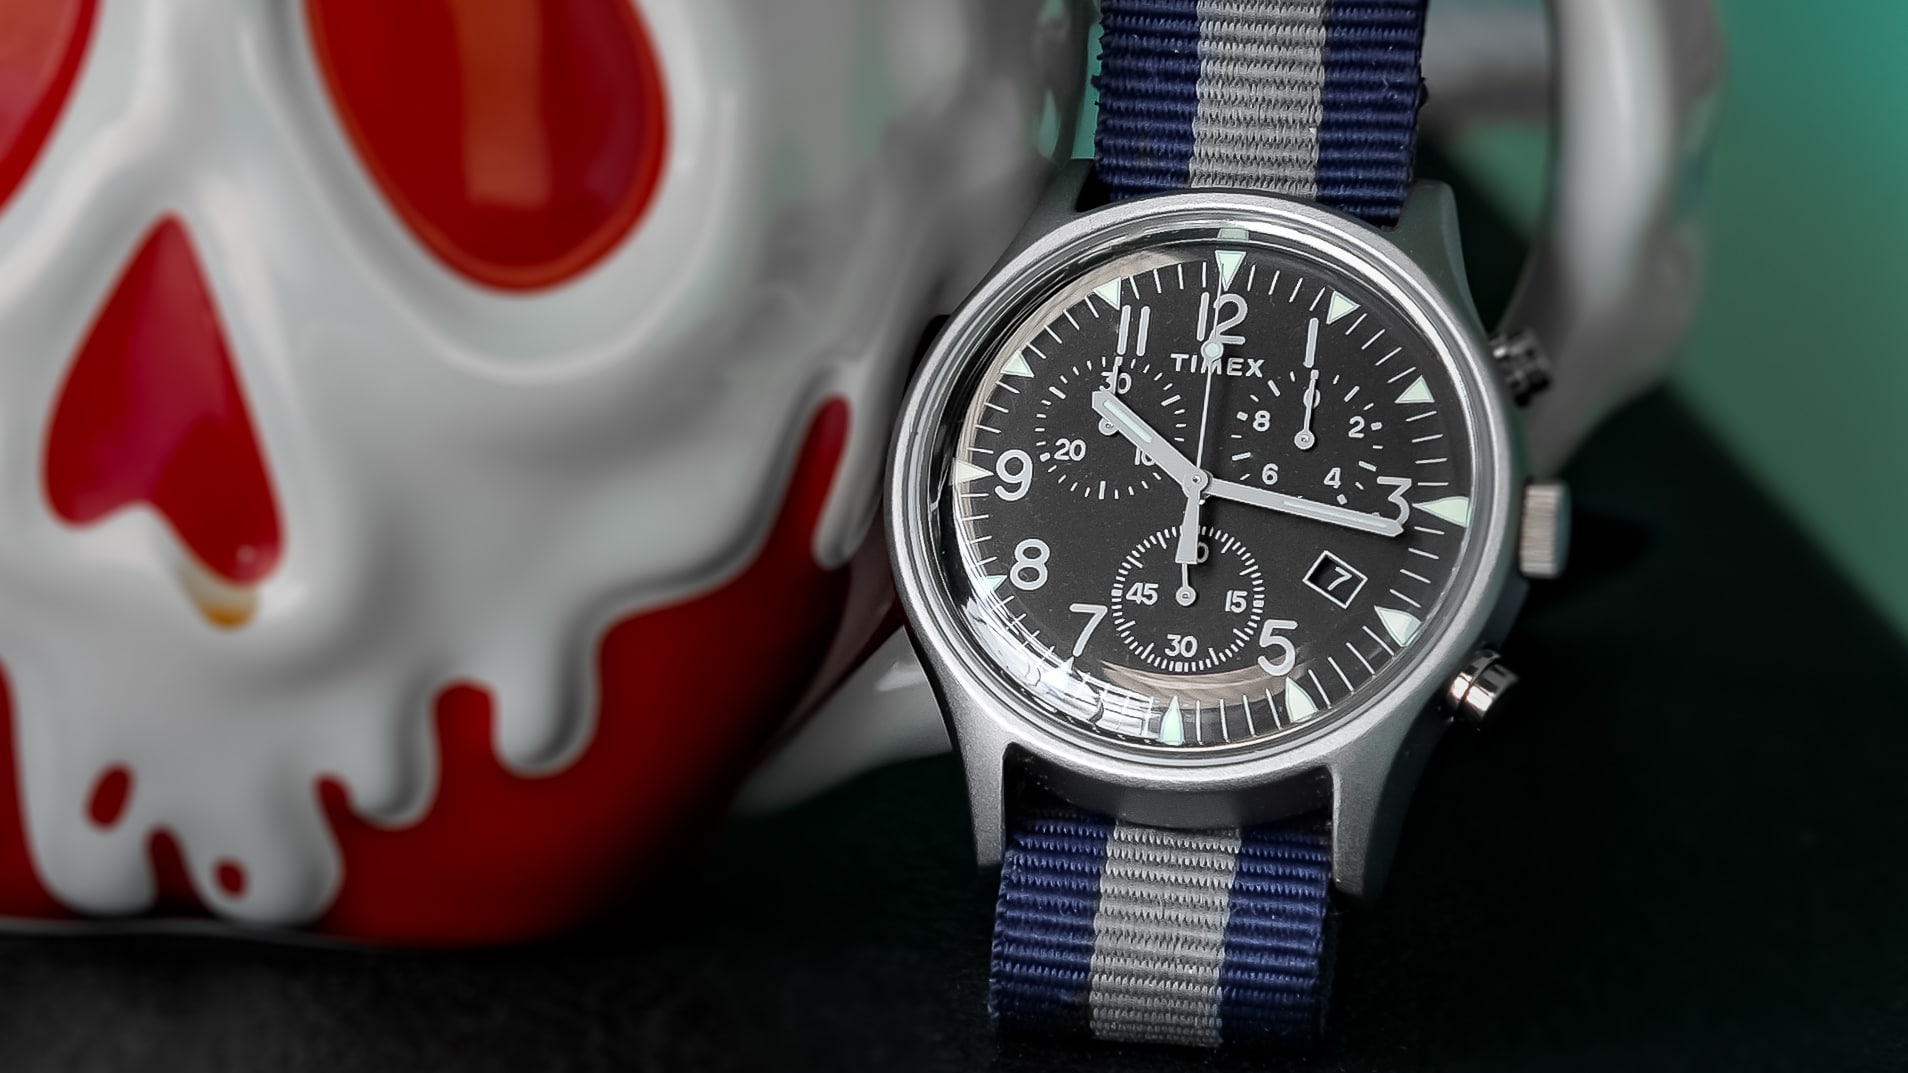 Timex MK1 Chronograph Review: What Are You Really Buying?